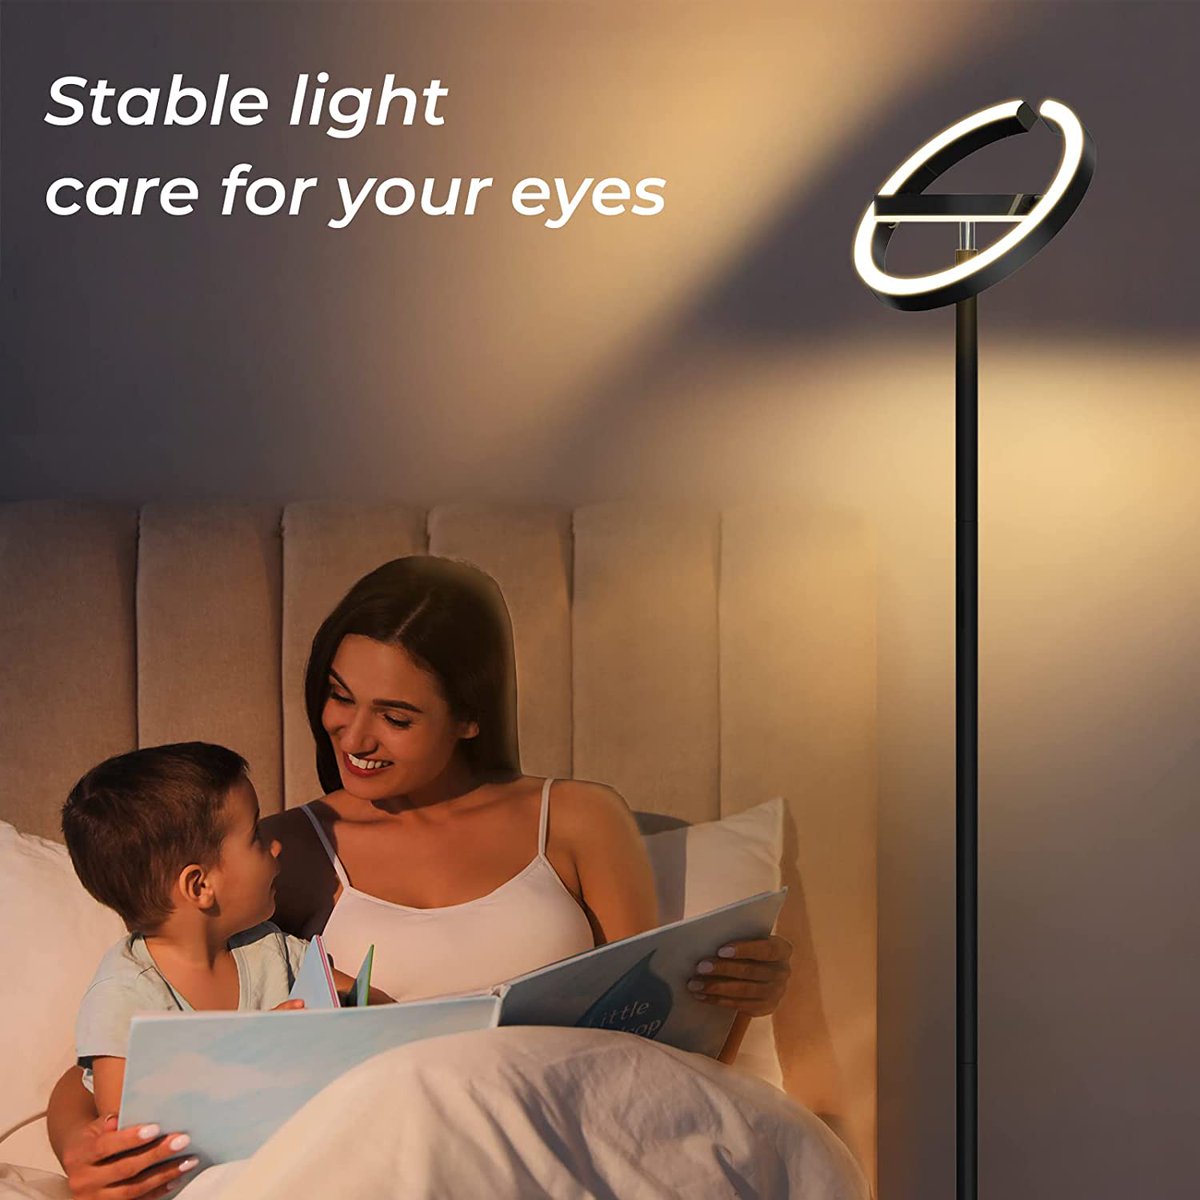 US ONLY📷 40% OFF PROMOTION for FIMEI Sky Modern Bright Floor Lamp with Rotatable Outer Ring Light Original price: $69.99 Deal Price: $41.99 Claim Code: 40AUM8KK Link: amazon.com/promocode/A7JS… #FIMEI#floorlamp#lamp#lights#usa#ROTATABLE#livingroom#room#HOMEDECOR#homerenovation